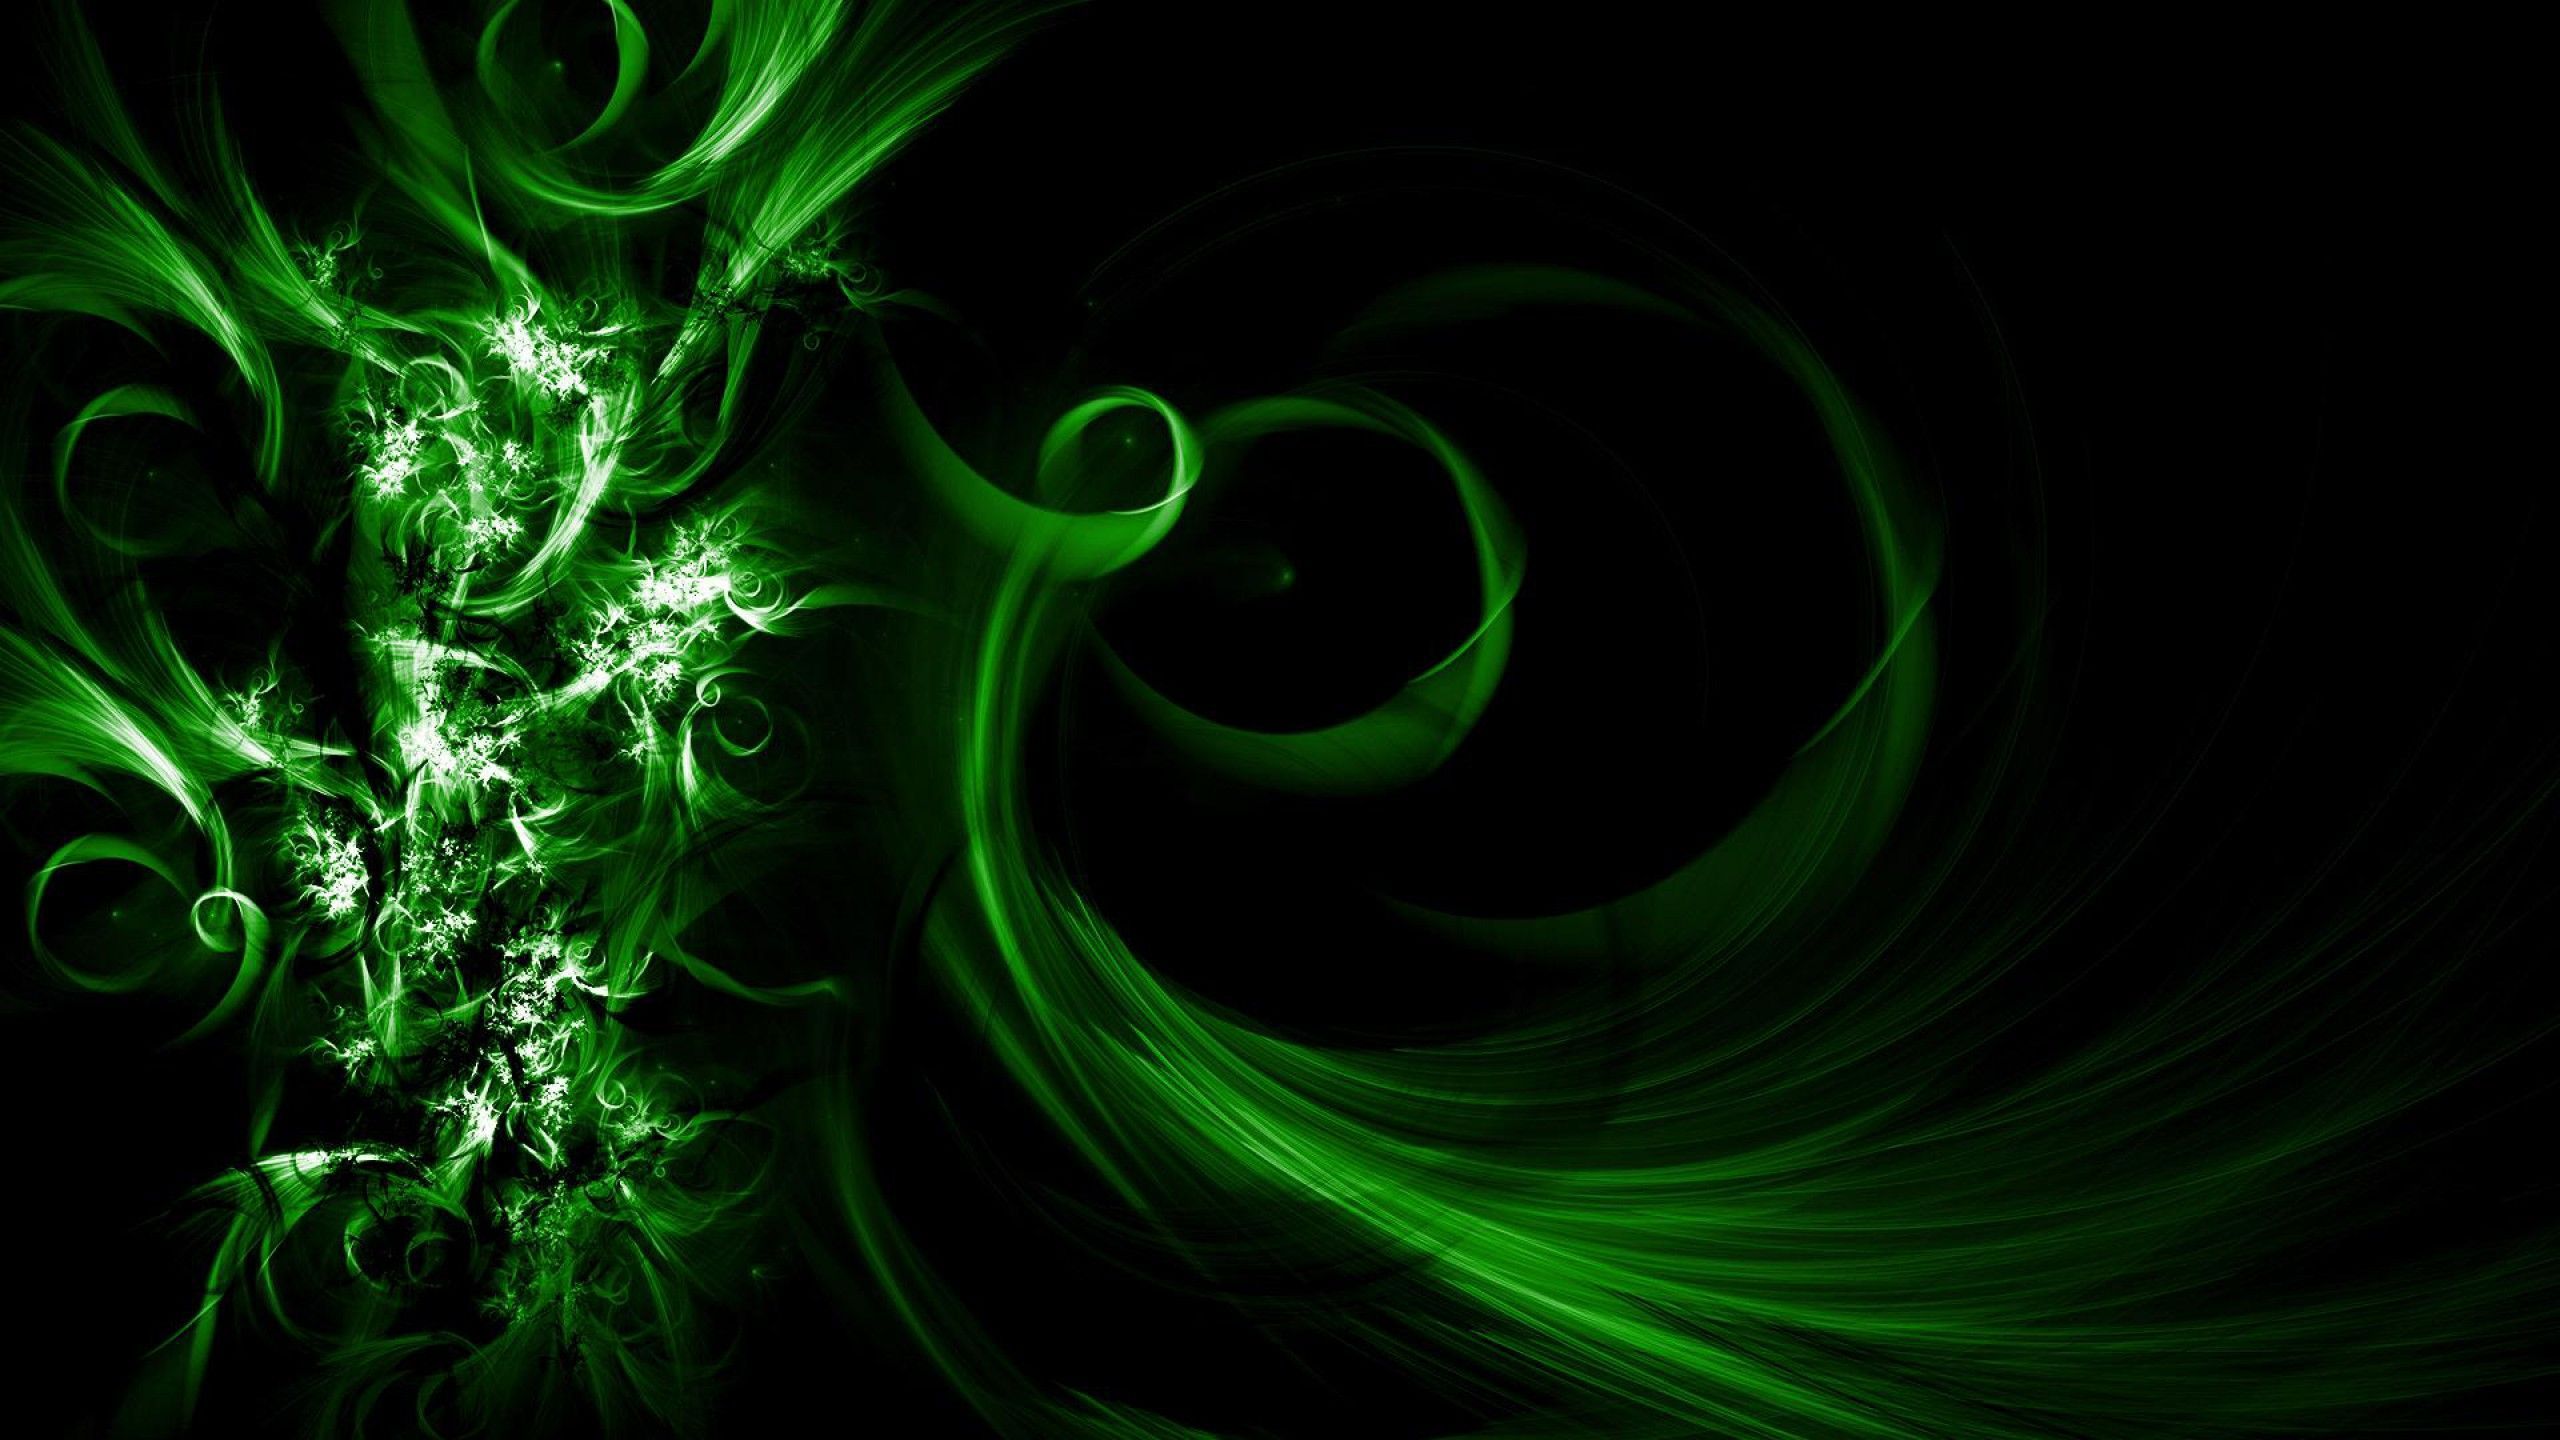 Cool Abstract Wallpaper with an Image of Dark Green Waves. HD